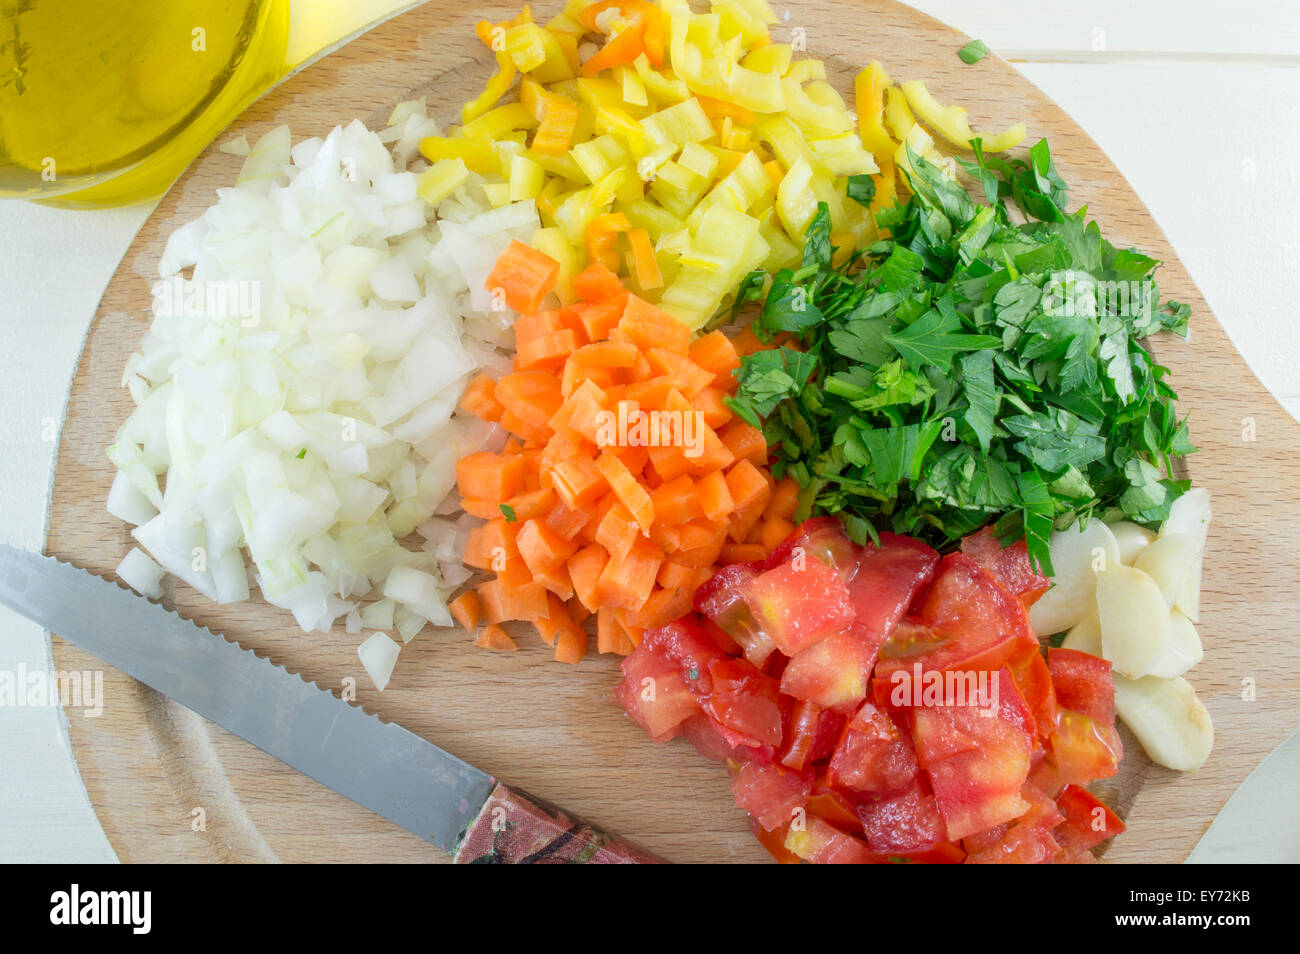 Chopped vegetables on an wooden plate with a knife  ready for cooking Stock Photo